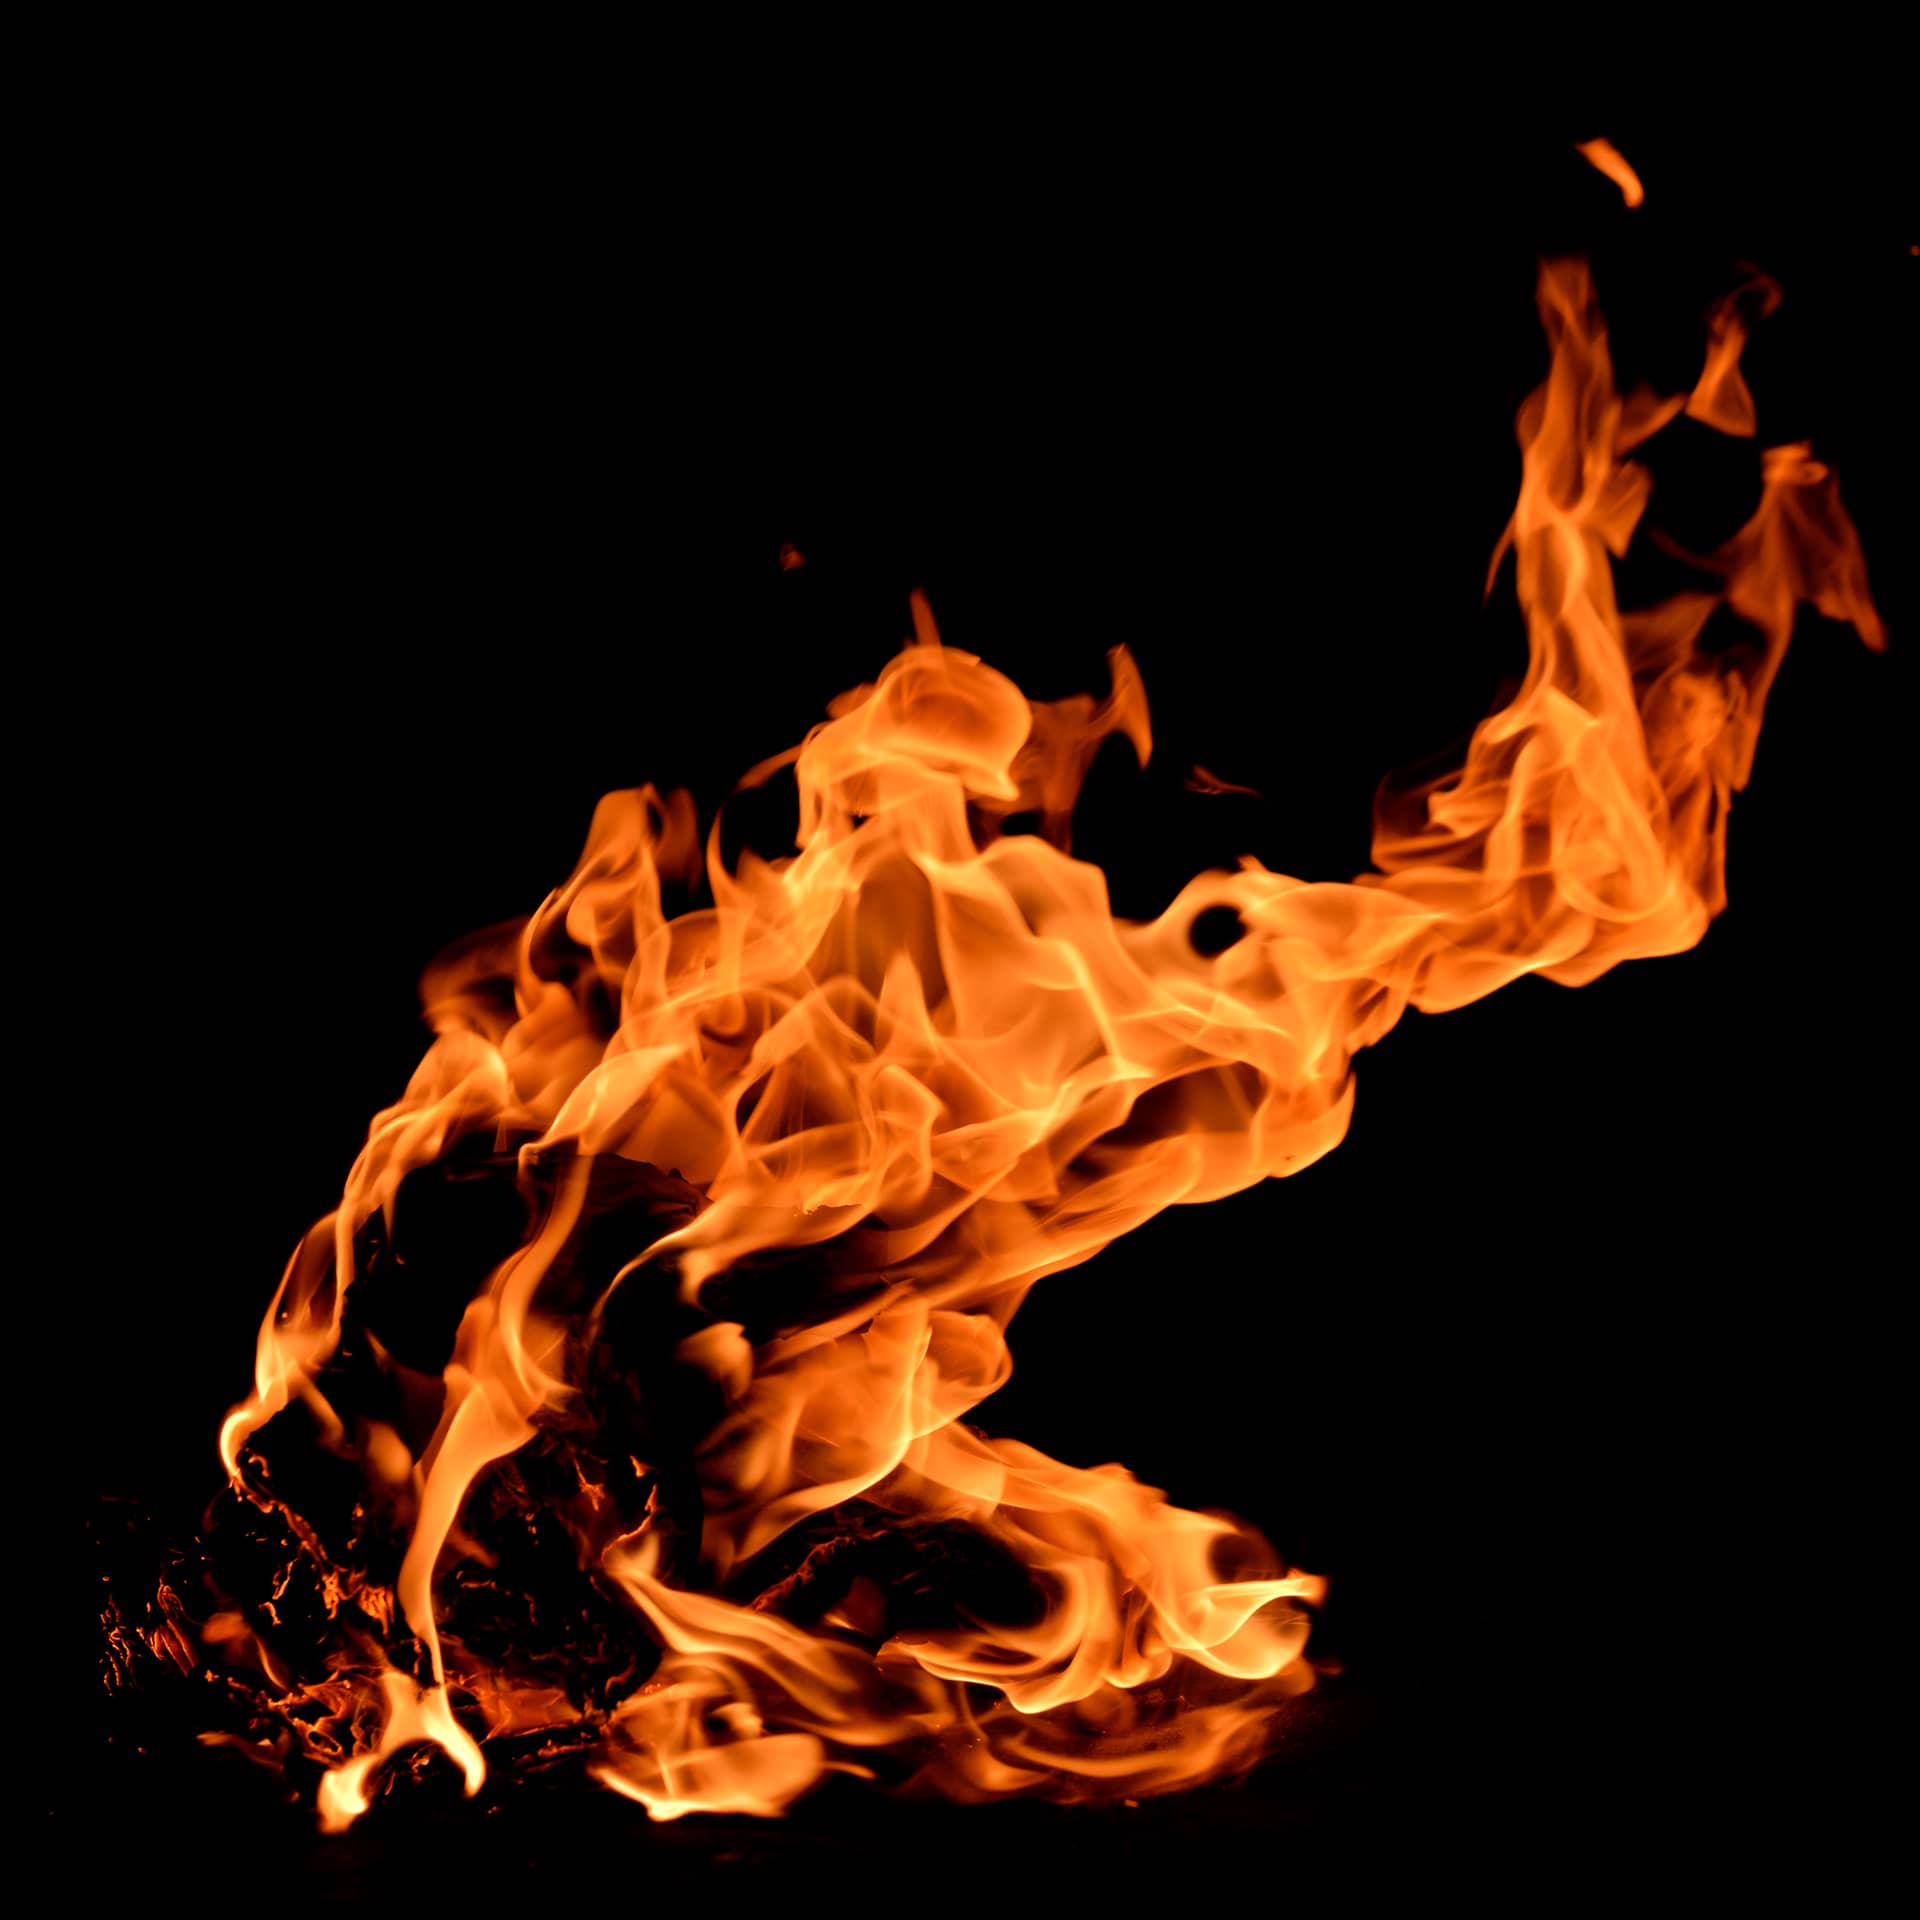 Fire flames with reflection black background